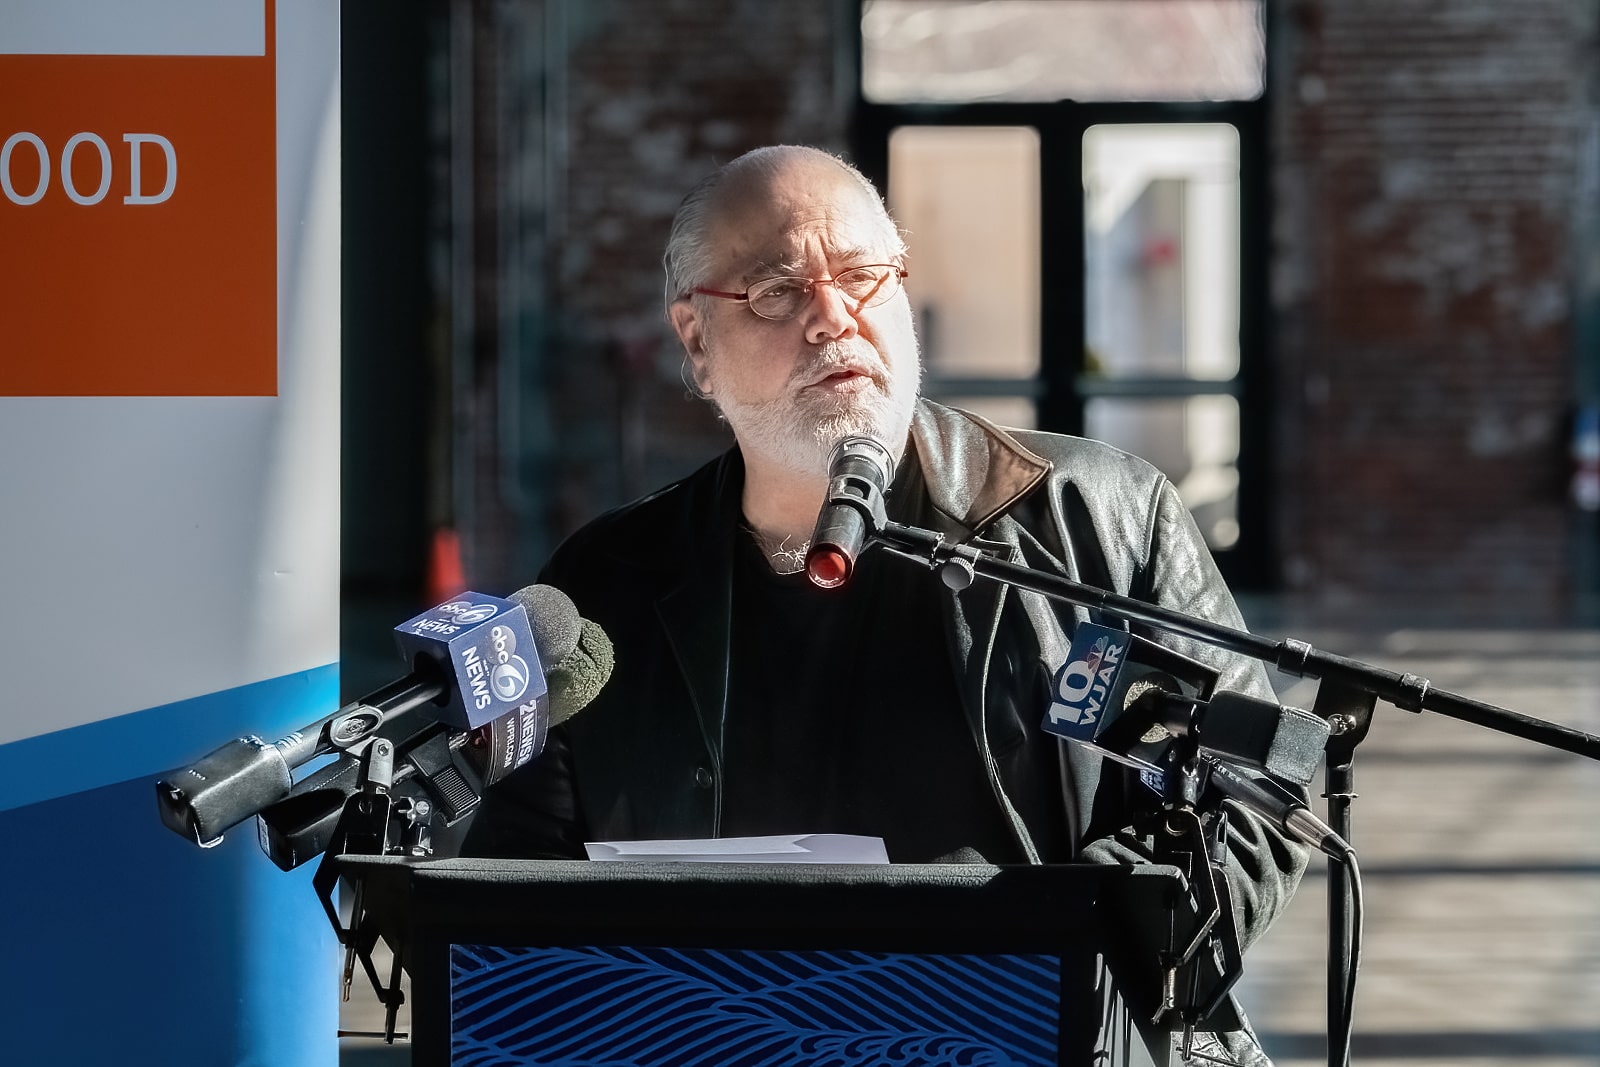 Peter Mello, managing director of Waterfire, noted that the Waterfire Arts Center, which housed Monday’s event, serves as a cultural anchor instituition in Central Providence. He spoke at the Roadmap release event on Monday, March 27, 20o23. Photo by Stephen Ide/ONE|NB